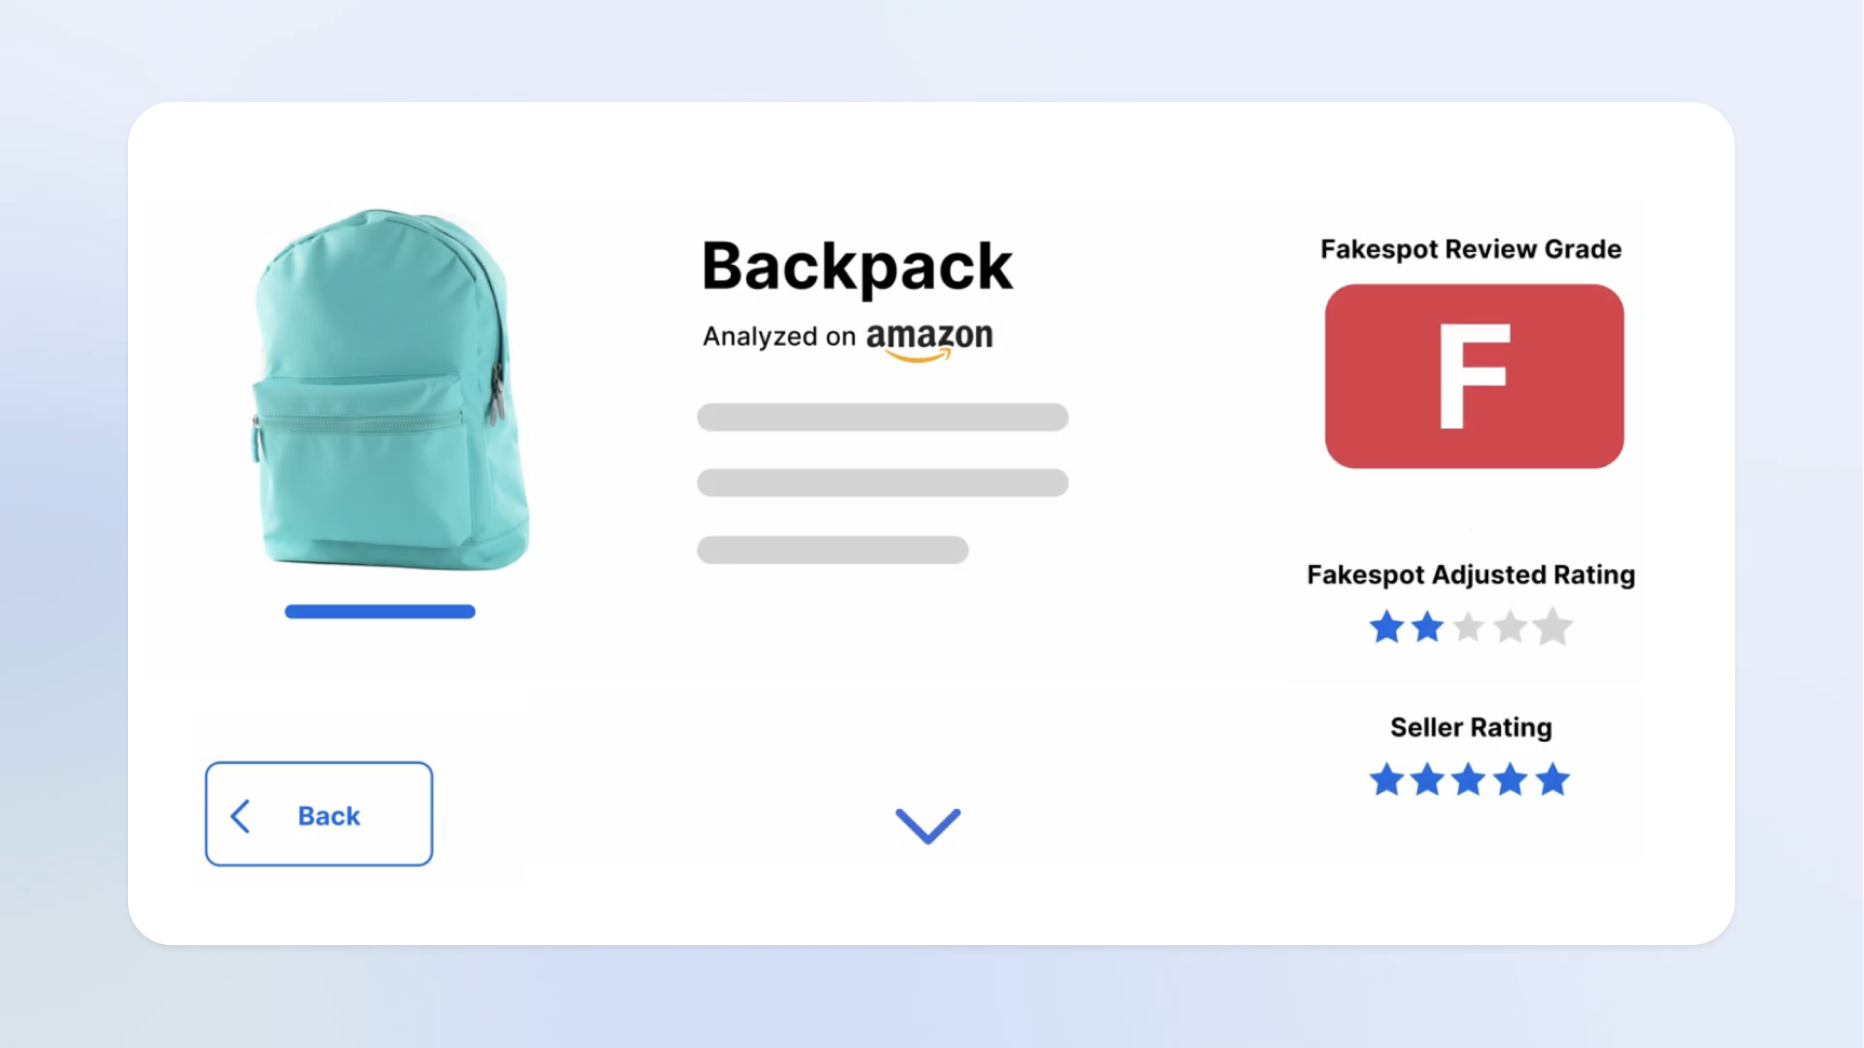 The backpack gets Fakespot Review Grade "F", Fakespot Adjusted Rating of 2 stars, Seller Rating of 5 stars as shown by Firefox on an amazon.com/back-pack